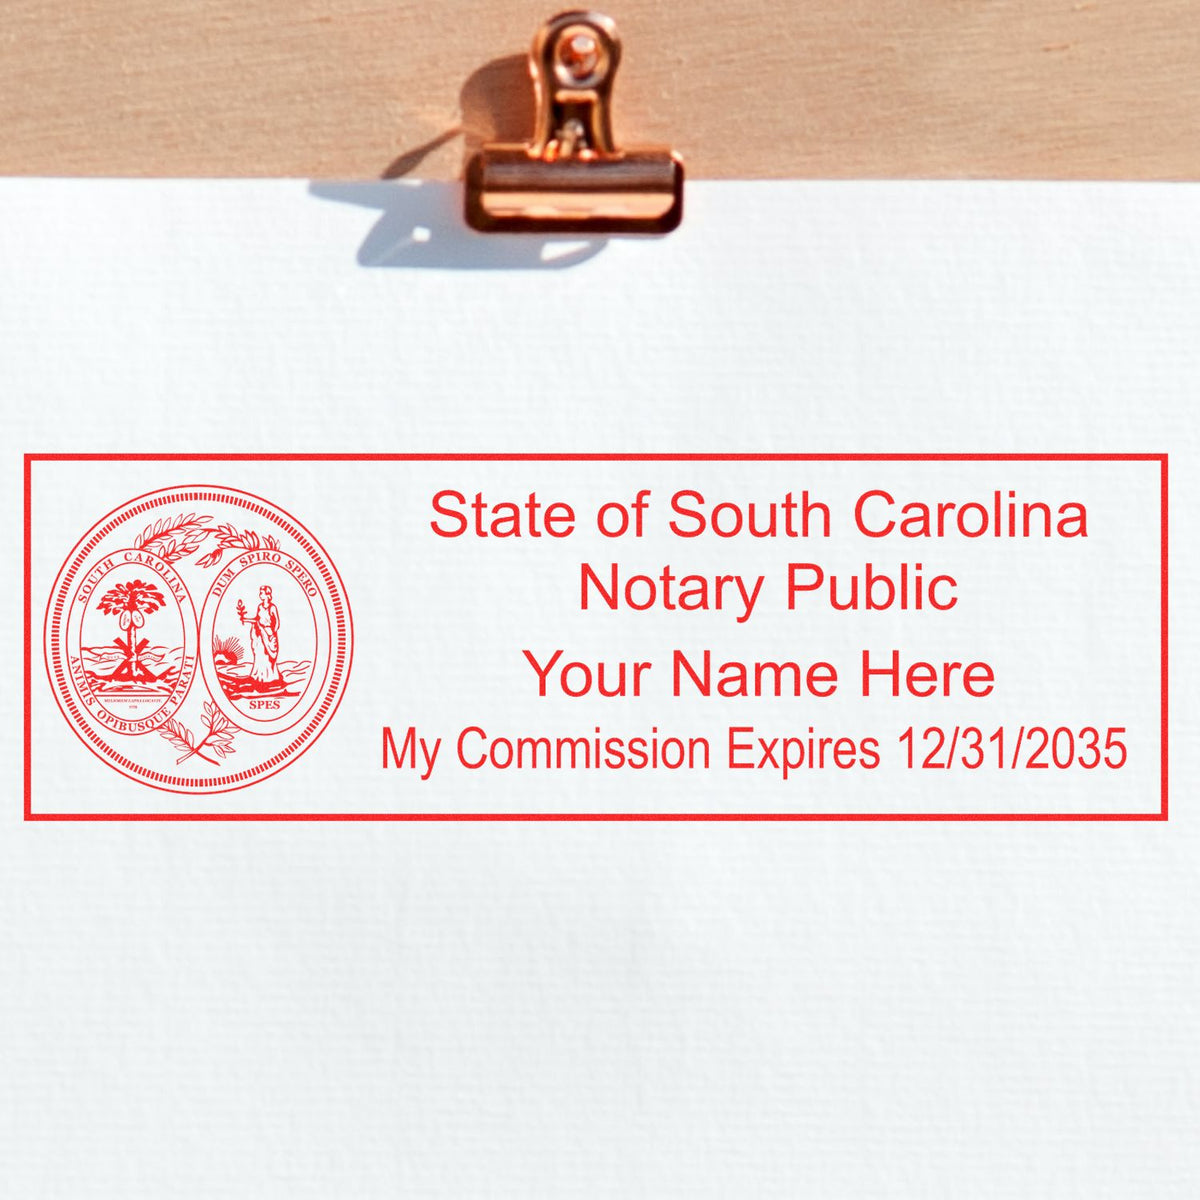 An alternative view of the MaxLight Premium Pre-Inked South Carolina State Seal Notarial Stamp stamped on a sheet of paper showing the image in use